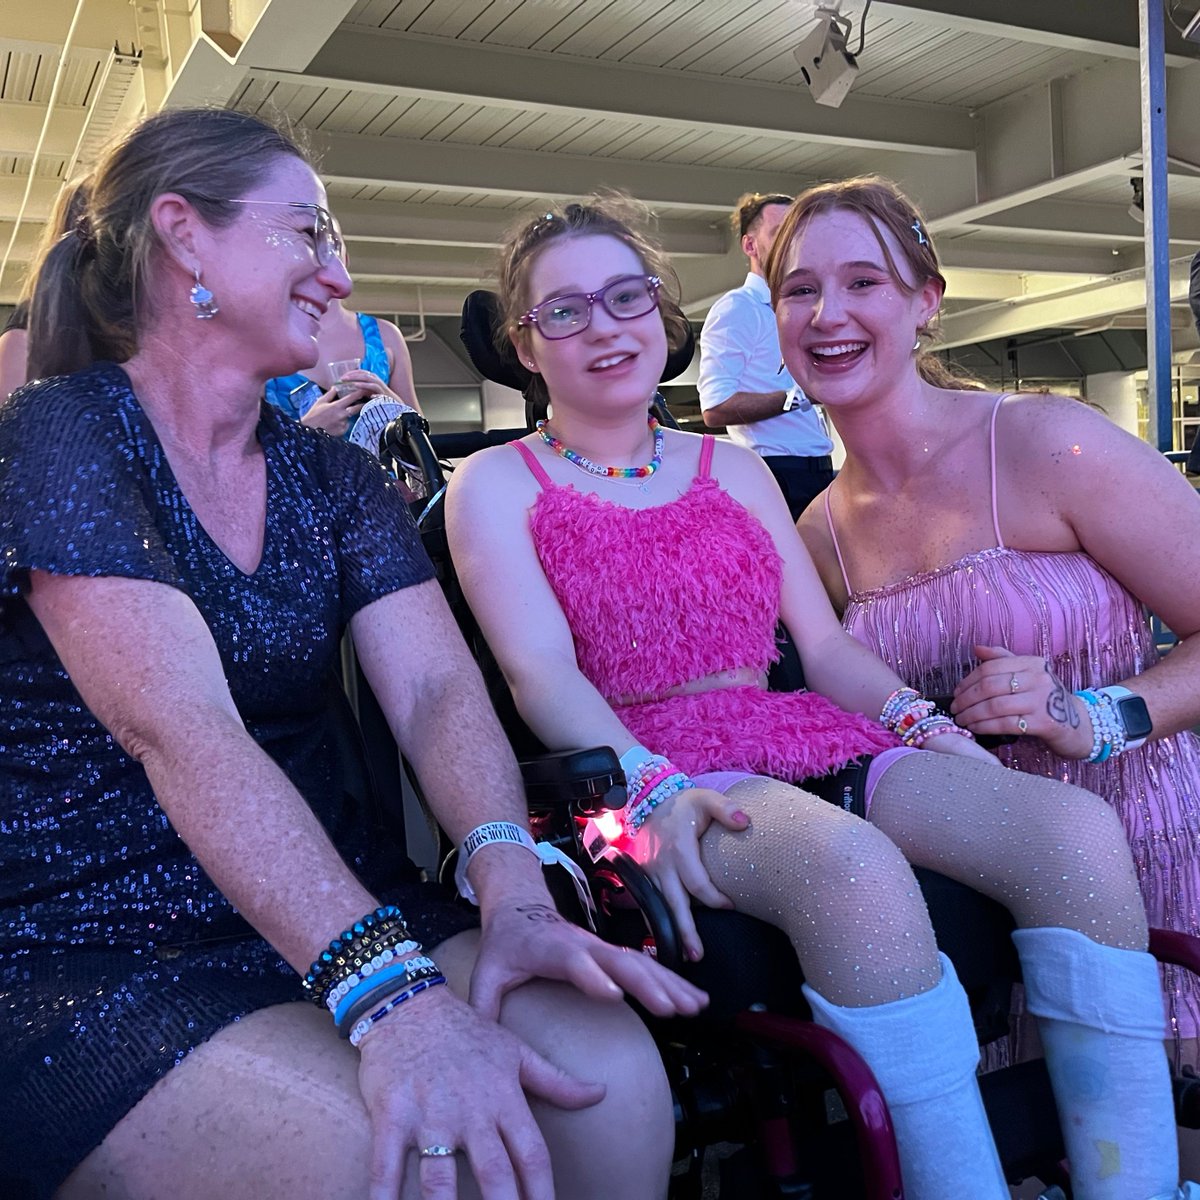 When Taylor Swift announced her ‘Era’s Tour’ coming down under, our Wishgranting team instantly jumped into action. Why? Because they knew how many seriously ill children dreamed of seeing Taylor Swift live in concert for their Starlight Wish!